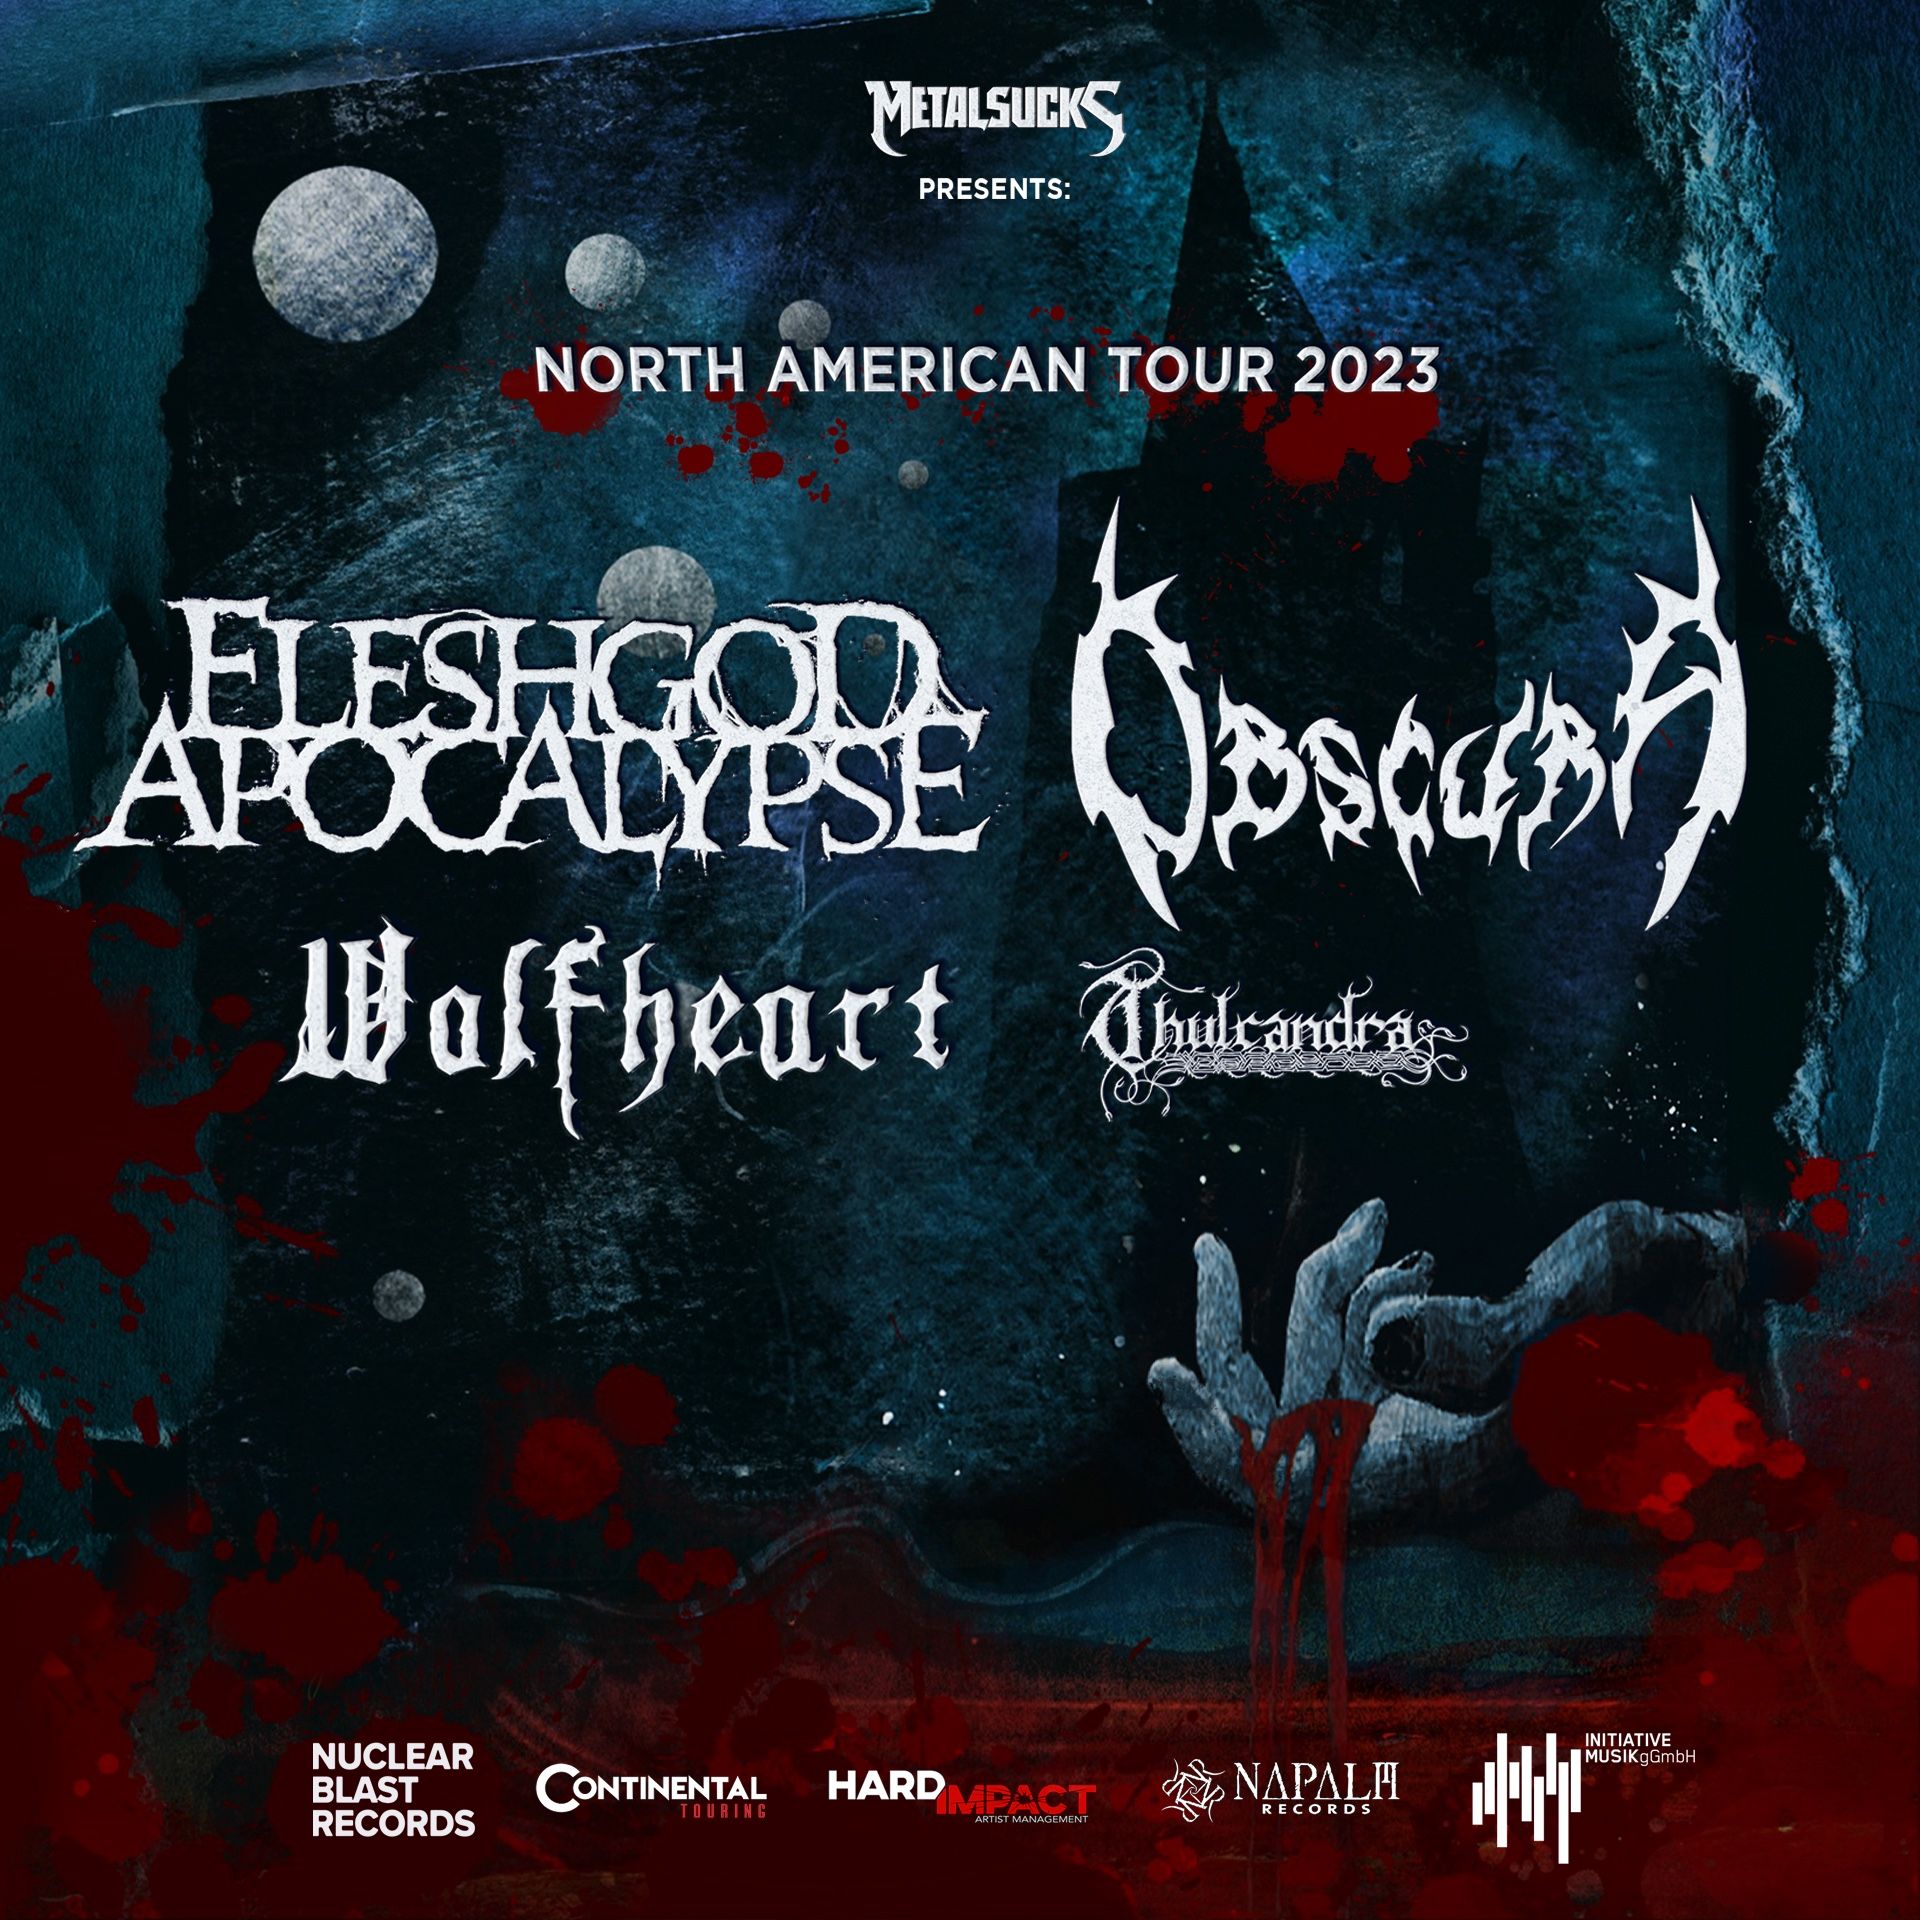 wwwWEB_SQUARE_ADD_DATE_Fleshgod_Obscura_Wolfheart_North_American_Tour_2023_Poster.jpg